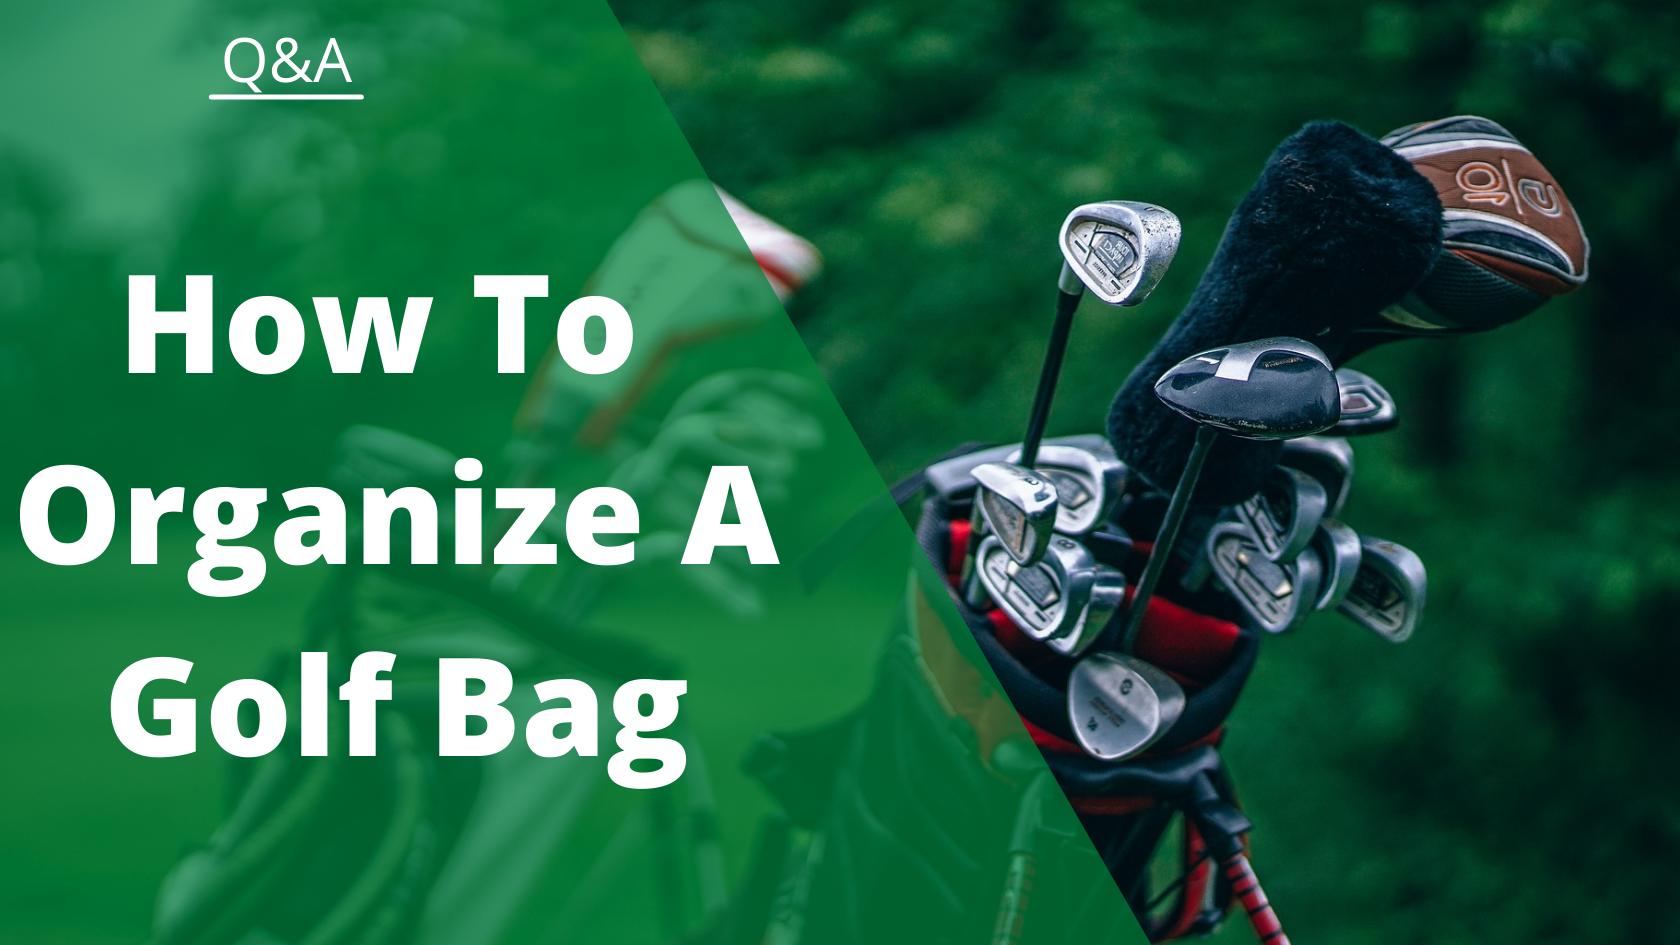 Tips on How to Organize Golf Bags